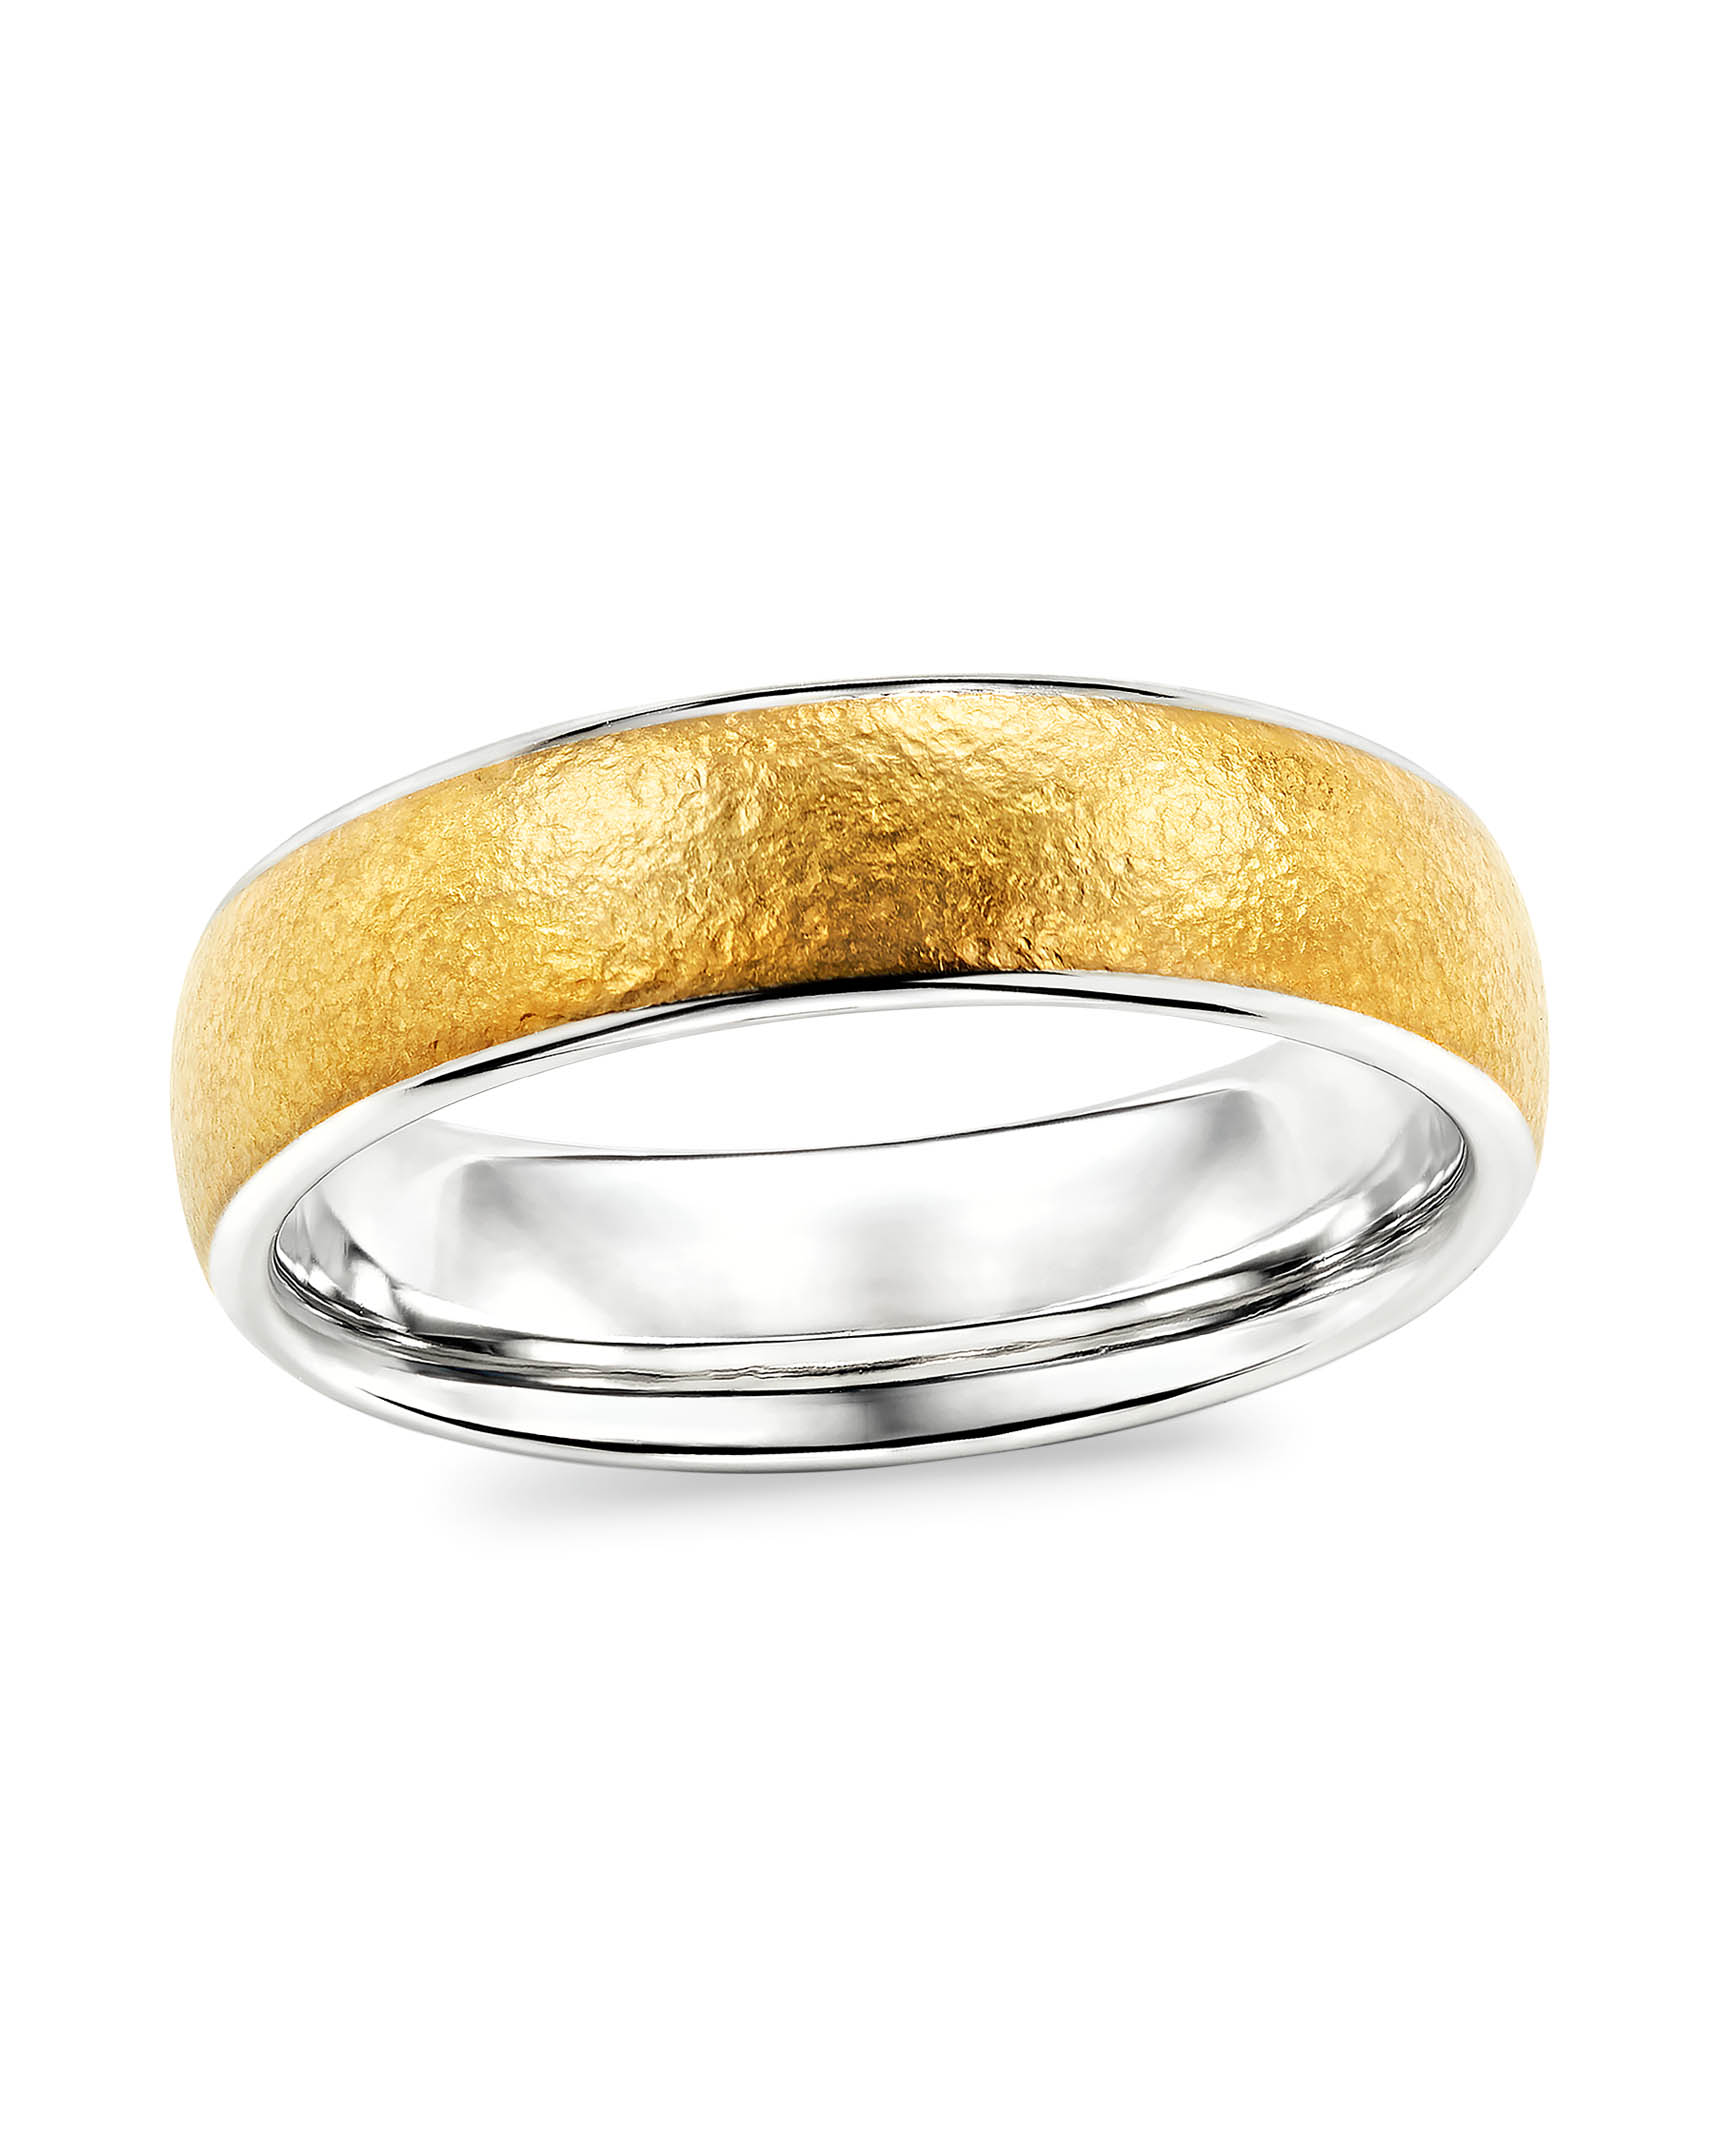 Genuine 24K solid gold wide band 7mm ring, Au999 gold, 99% of gold 1.2 –  Spainjewelry